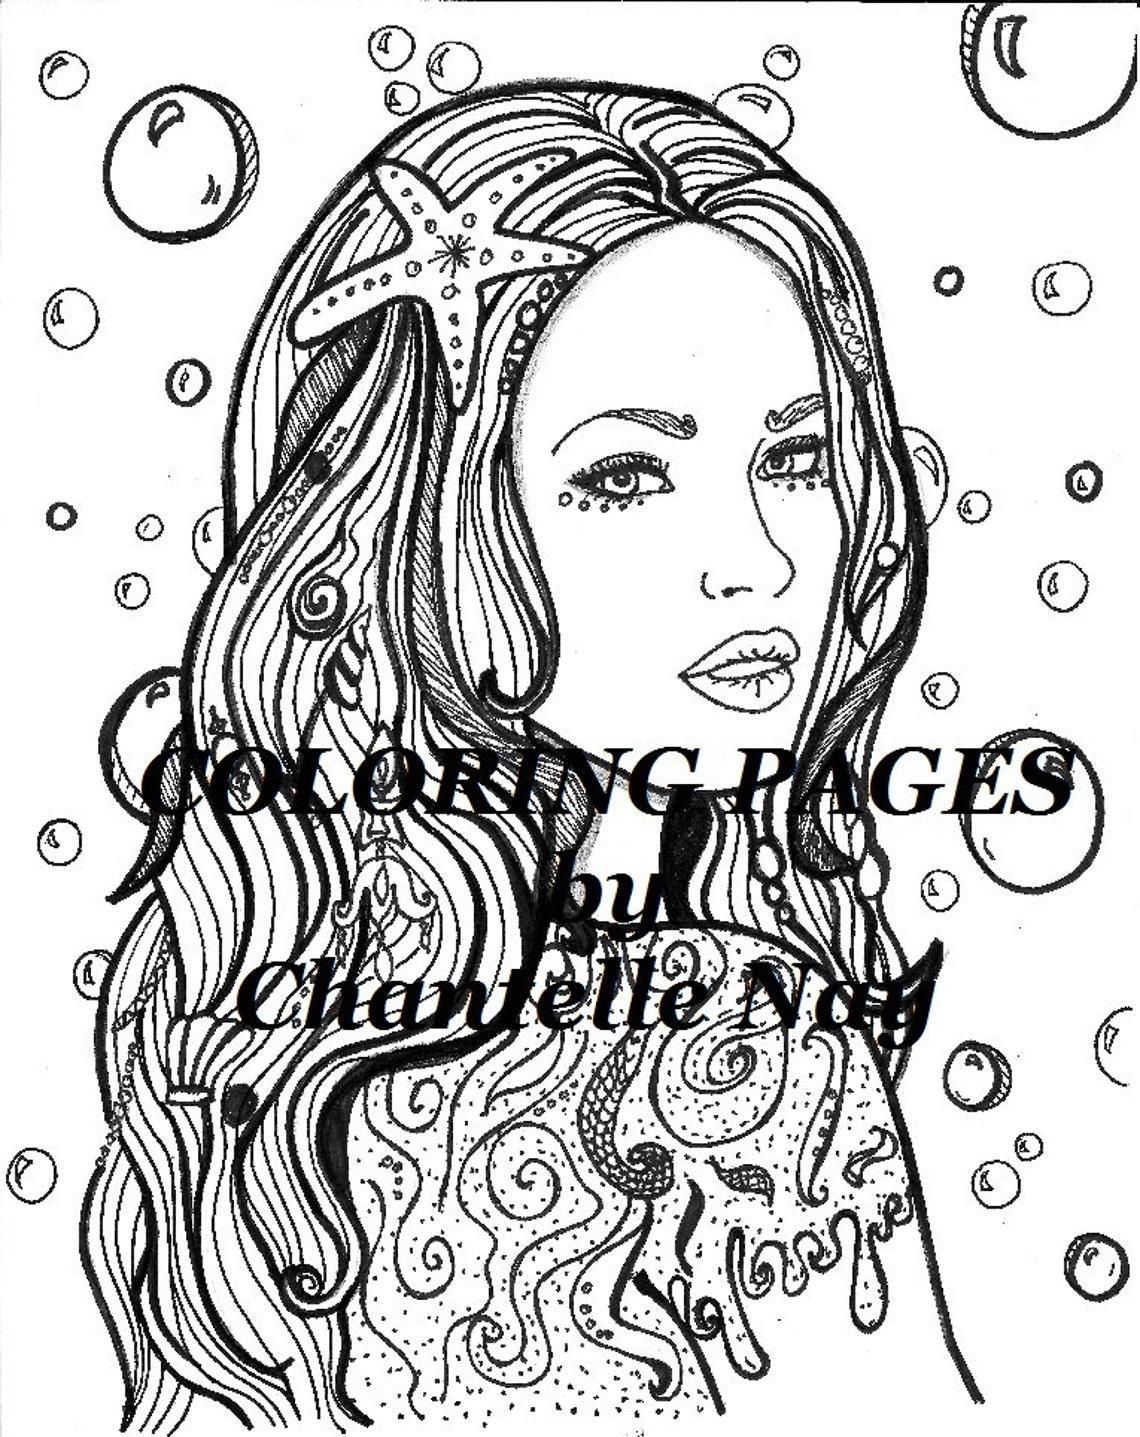 Download Megan Coloring page woman face adult coloring picture | Etsy